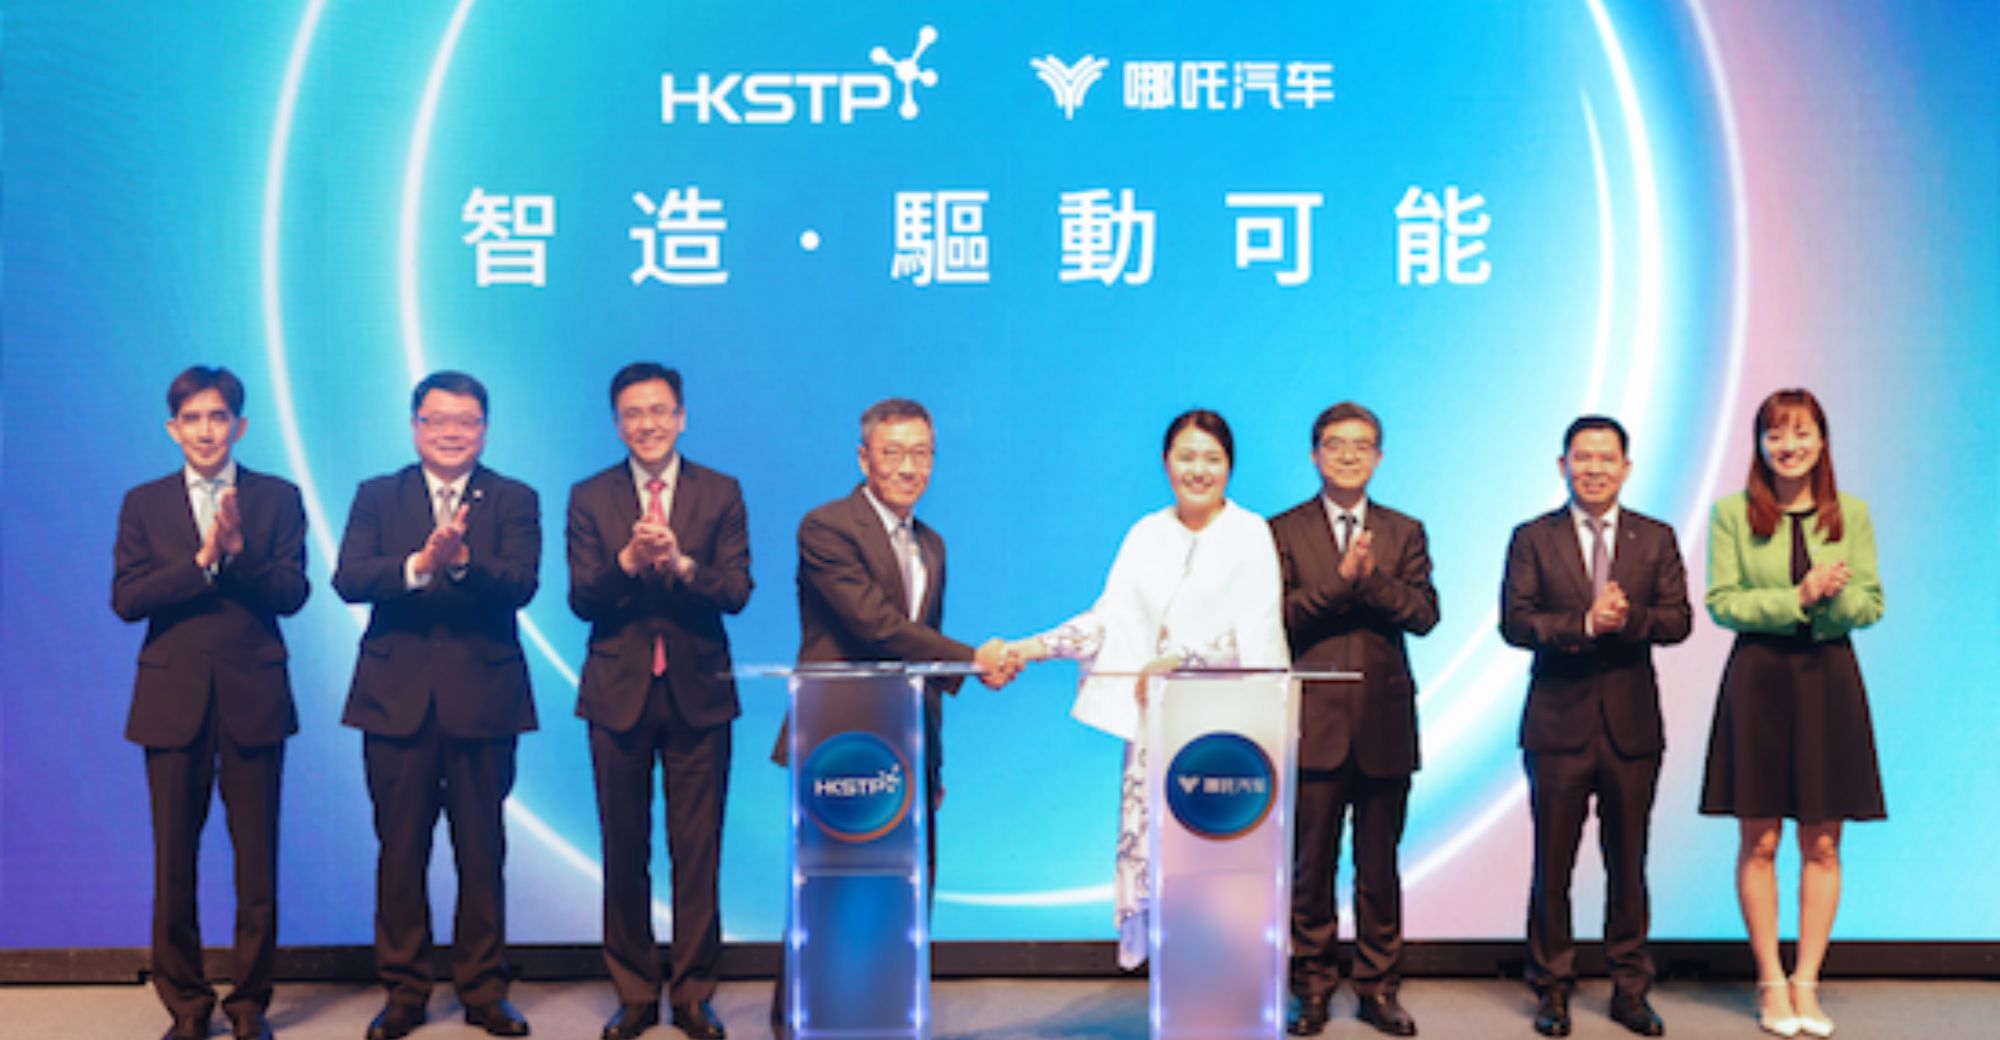 NETA Invests $40 million in Hong Kong Science Park for HQ and R&D